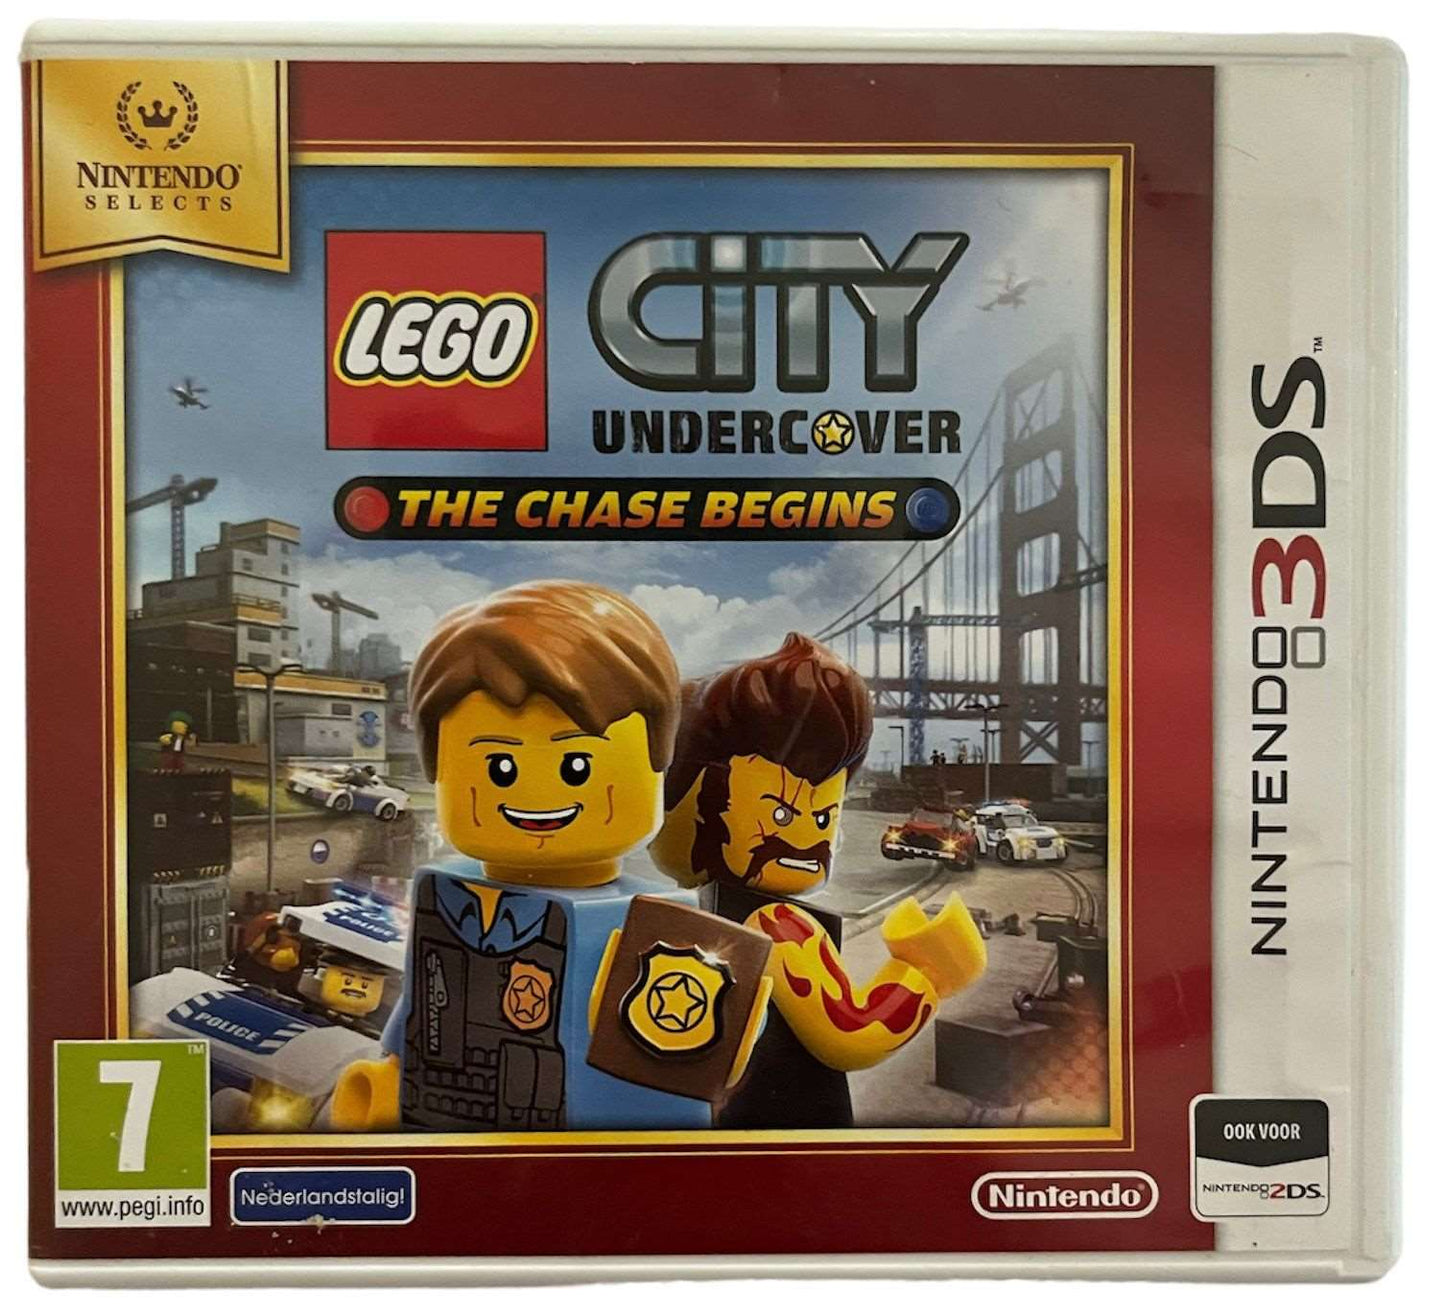 Lego City Undercover the chase begins 3D - 3DS